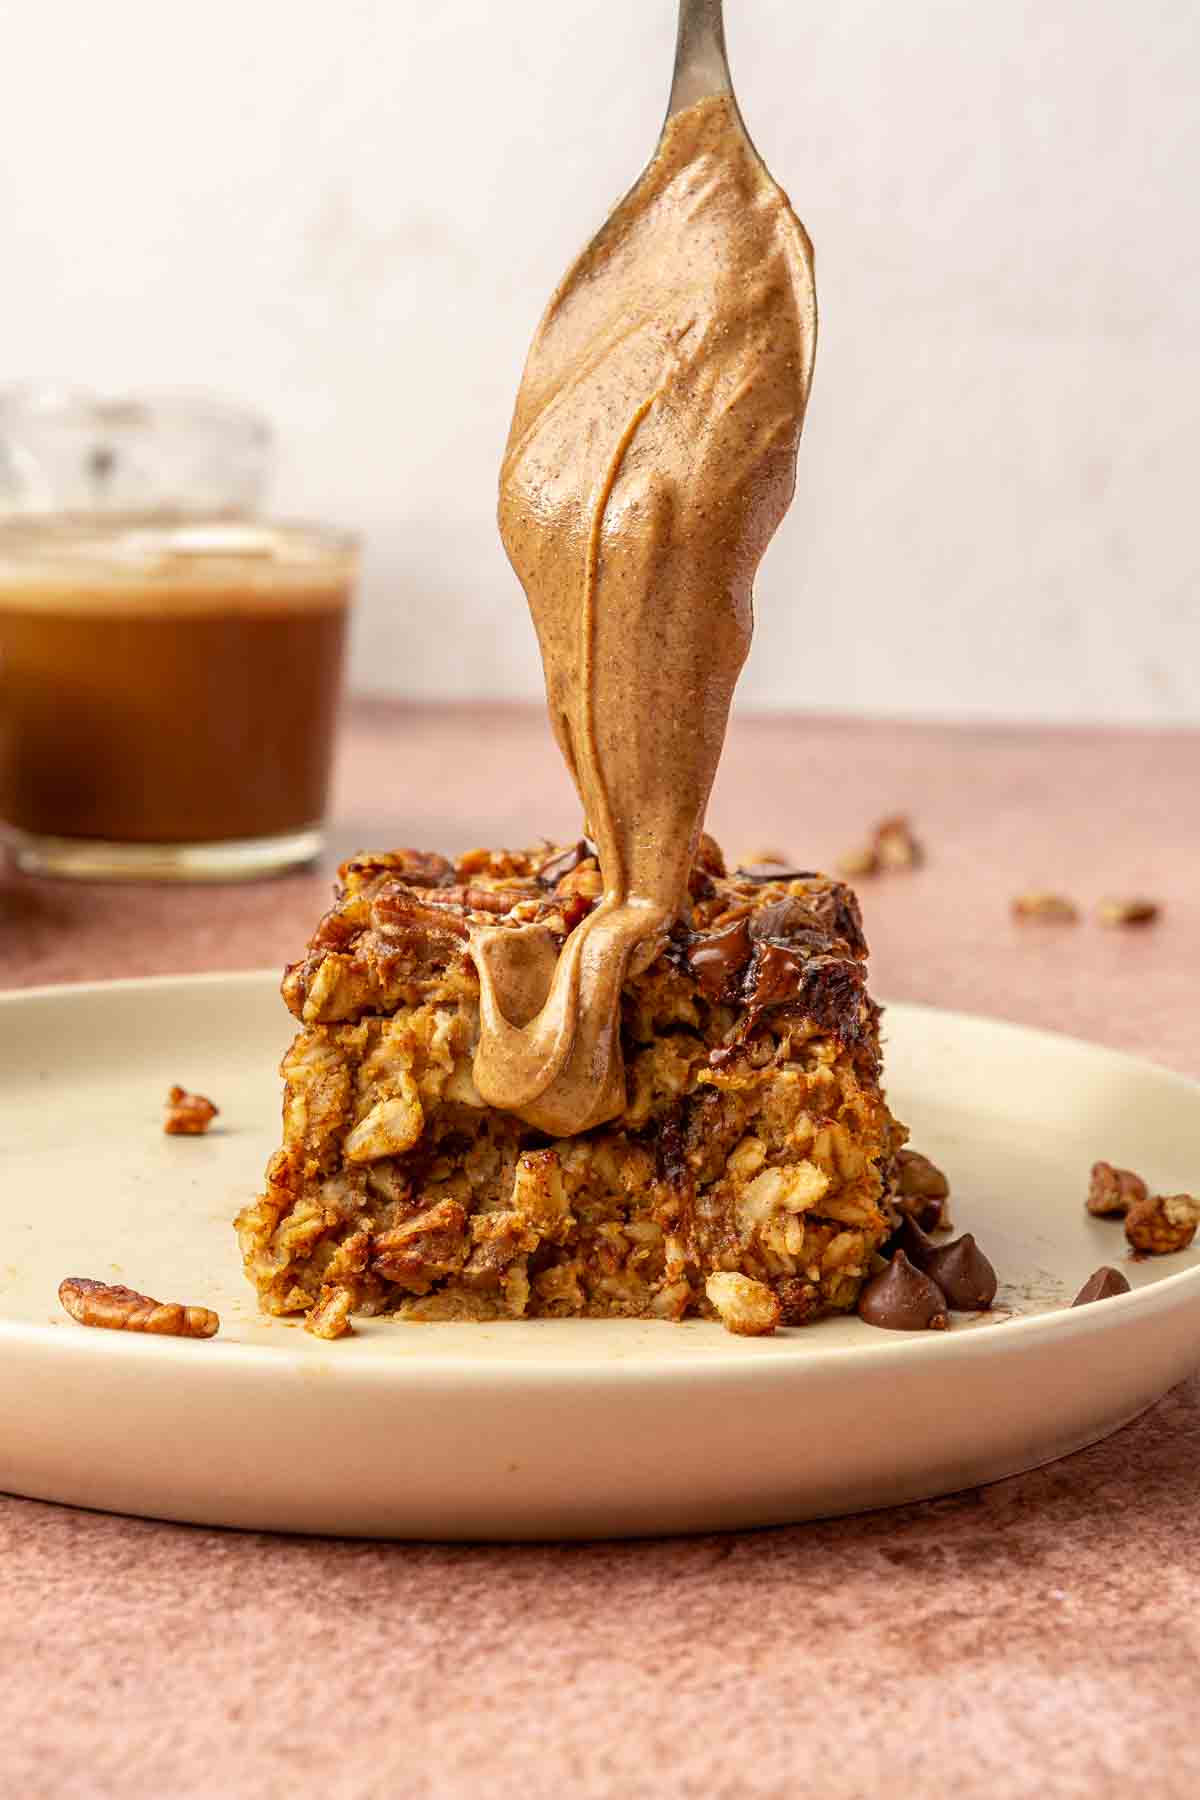 Drizzling almond butter over a serving of baked oatmeal.